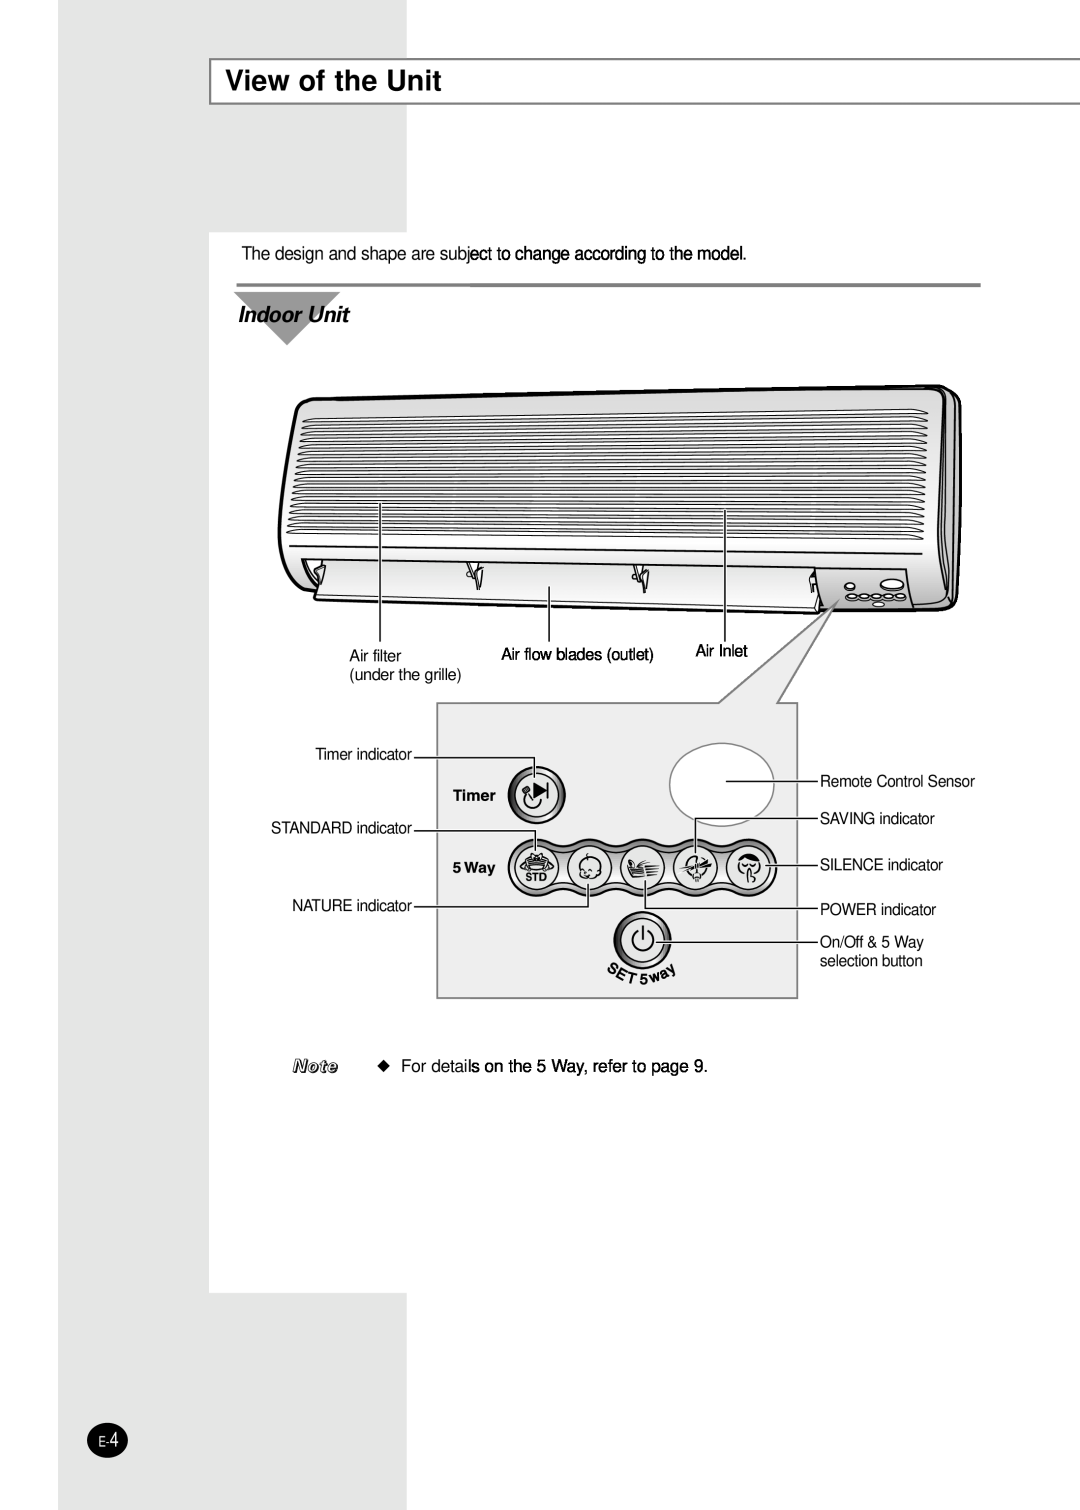 Samsung AM27B1(B2)C13 installation manual View of the Unit, Indoor Unit 